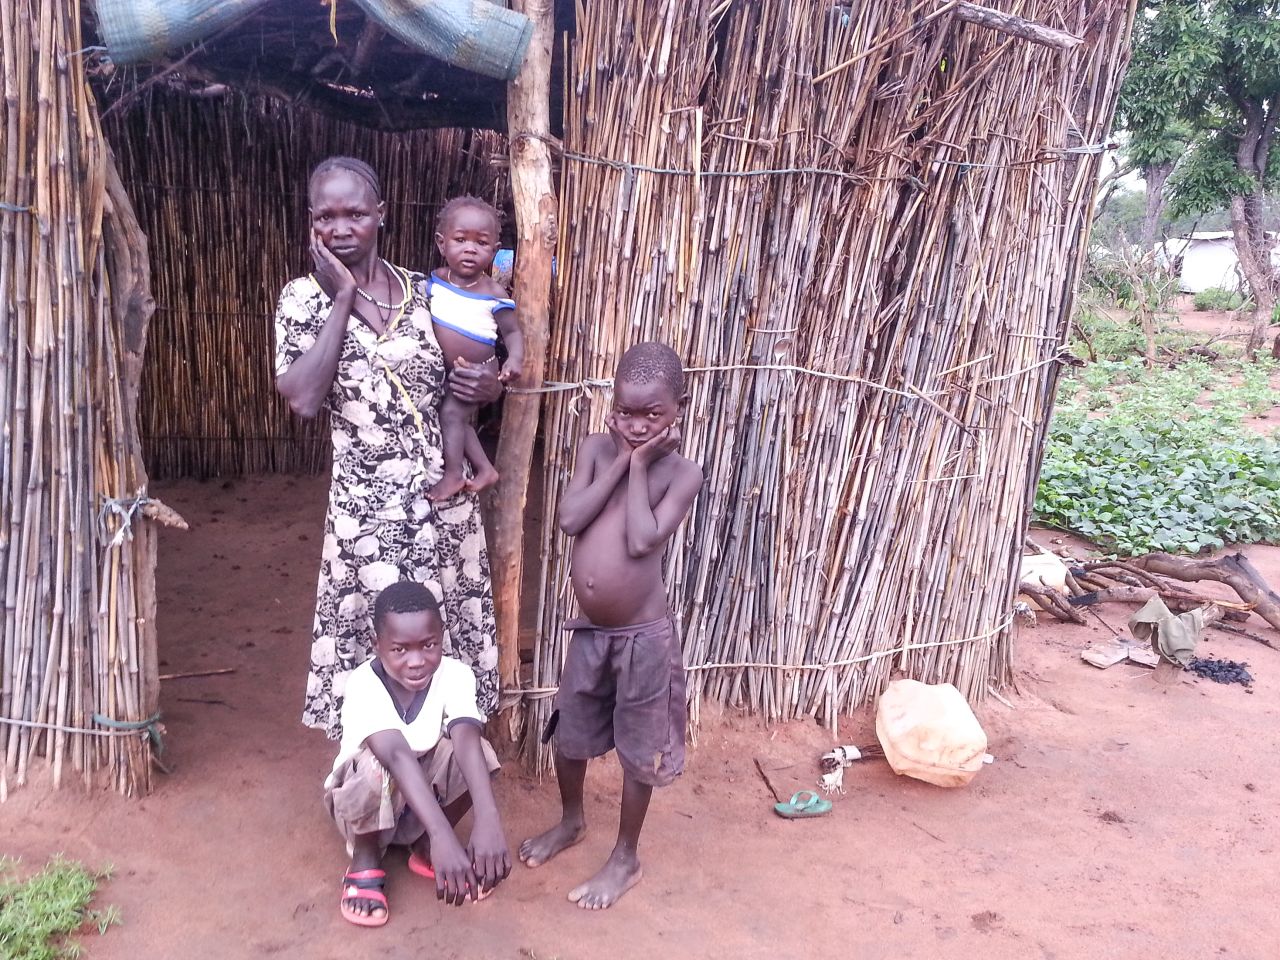 <br />"This refugee family in Ajuong Thok is worried. They are thinking about the people that they left behind in the Nuba Mountains. Life in Ajuong Thok is very difficult for single mothers. If she needs to go to collect firewood or water, who will look after her child?"